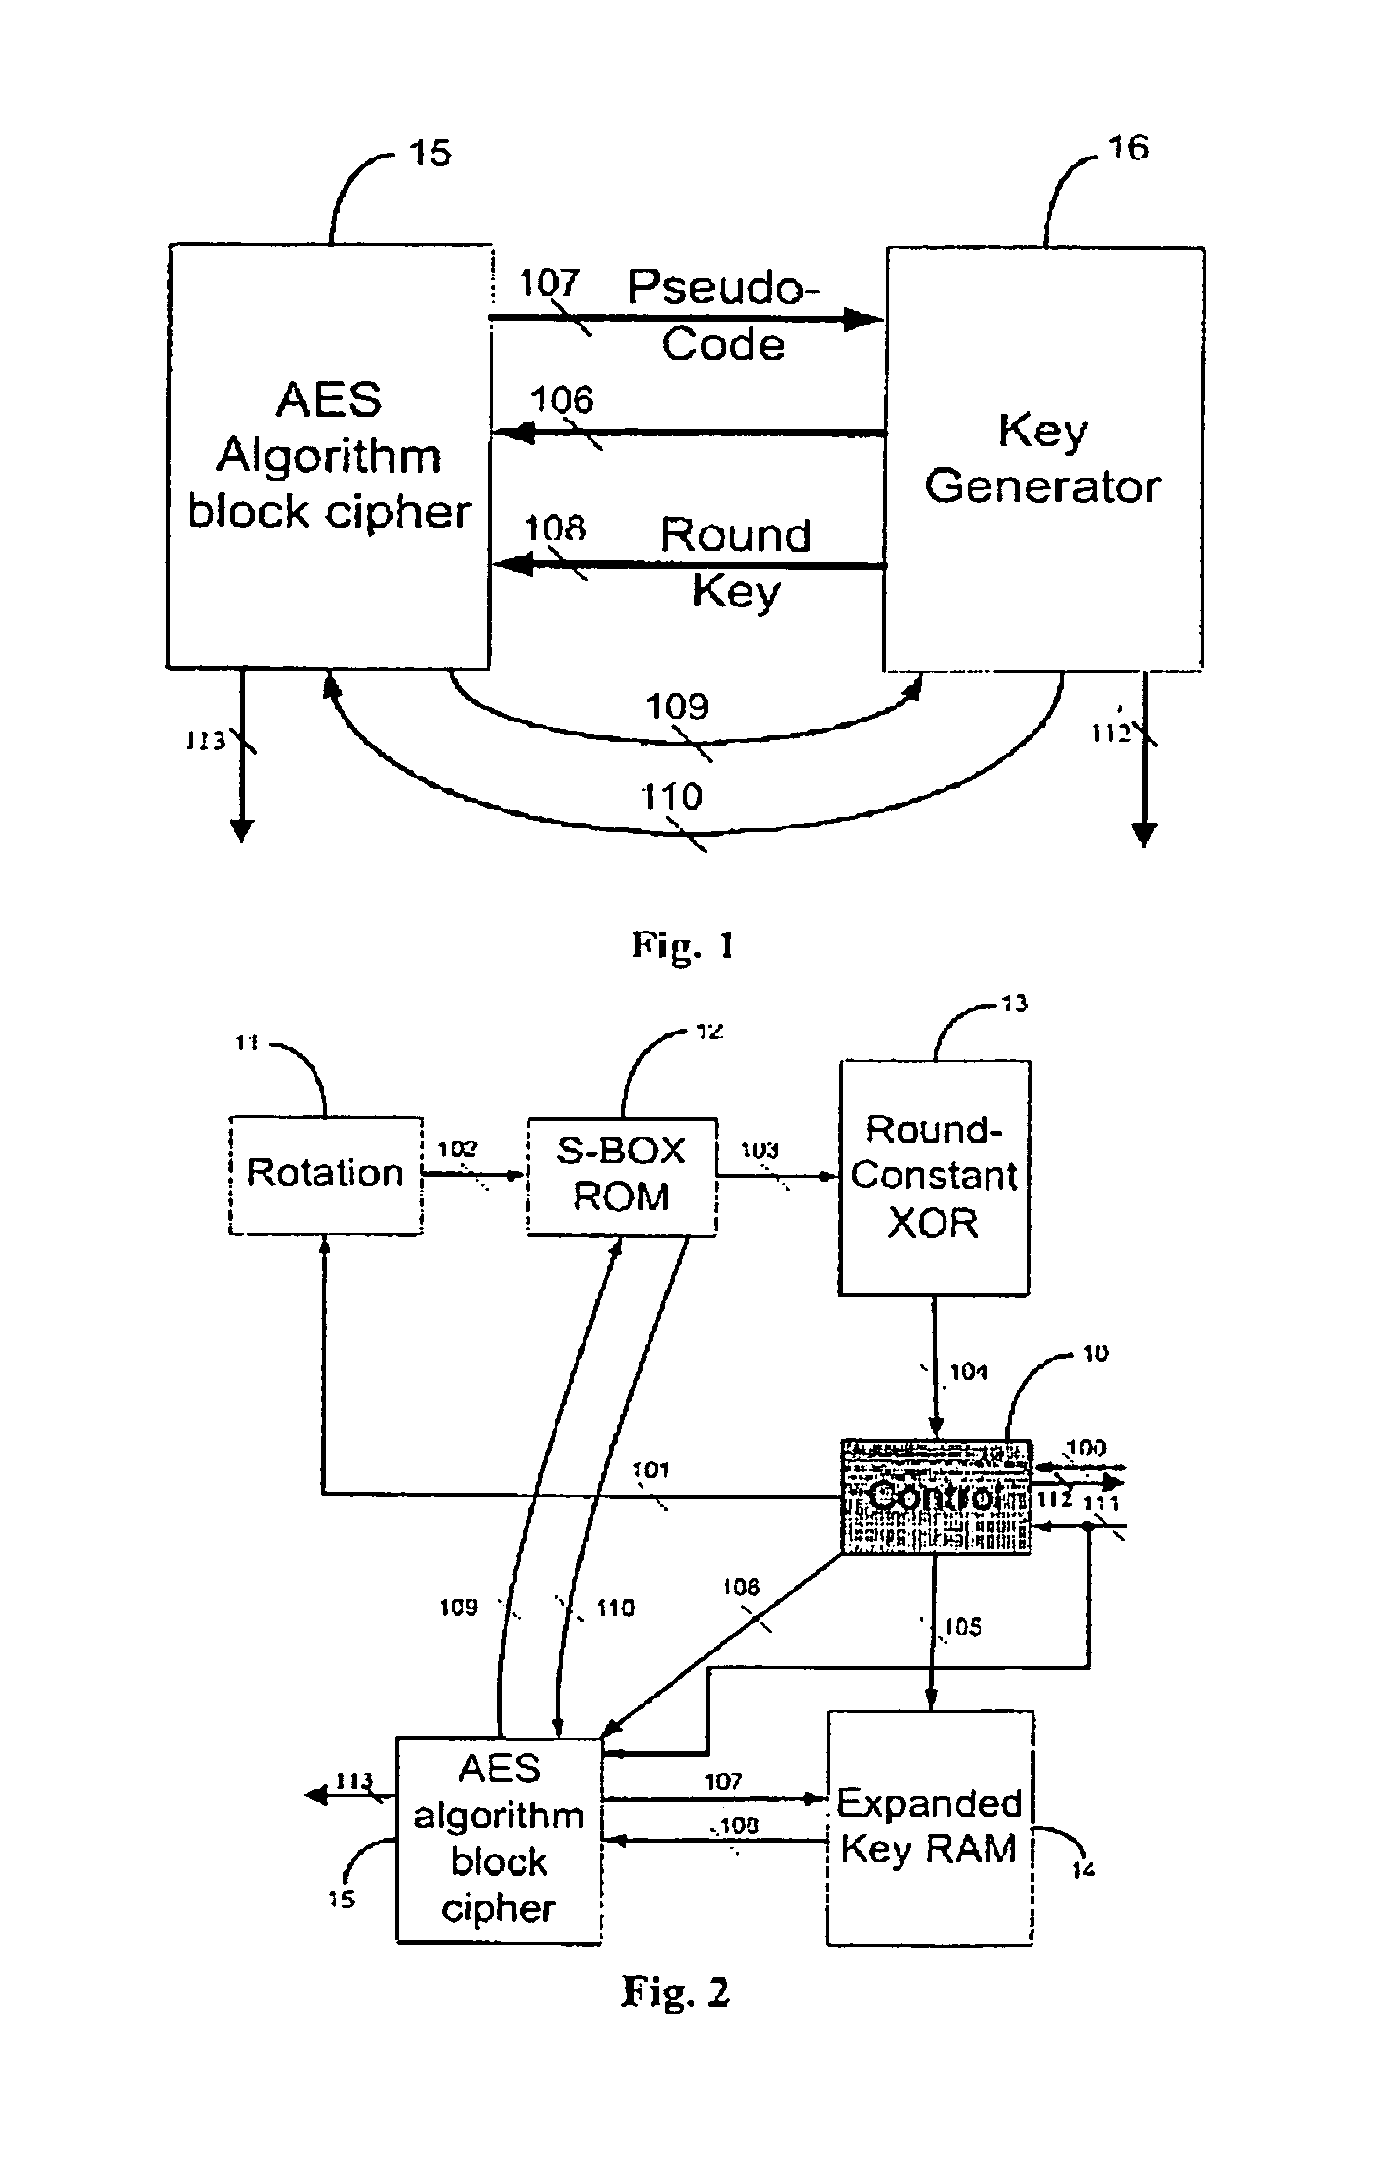 Fast key-changing hardware apparatus for AES block cipher